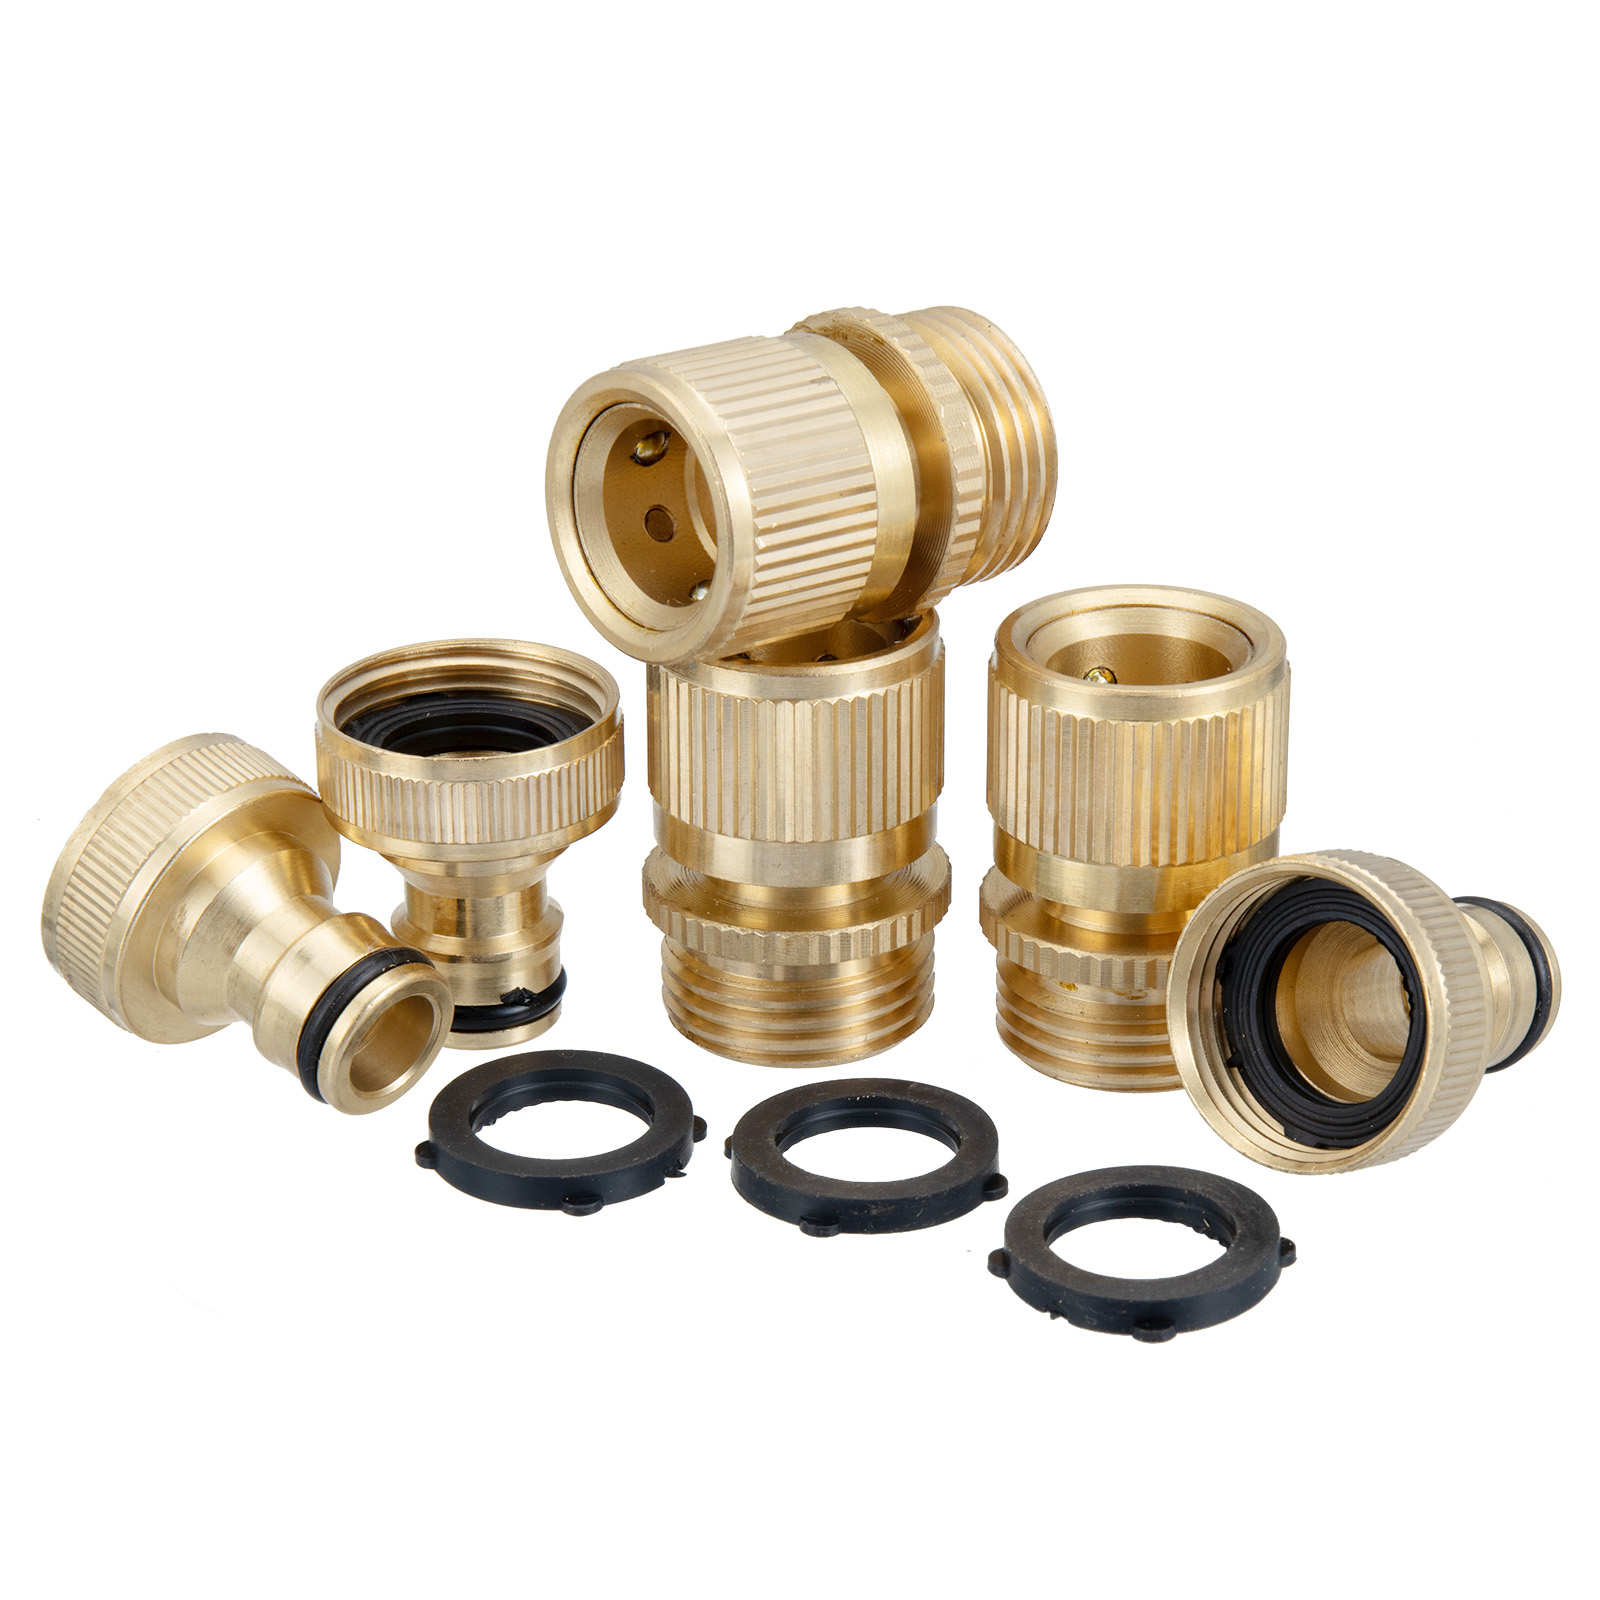 MATCC-Brass-Inner-Teeth-Quick-Connector-Set-34quot-GHT-Brass-Garden-Hose-Quick-Connector-With-Washer-1898352-8